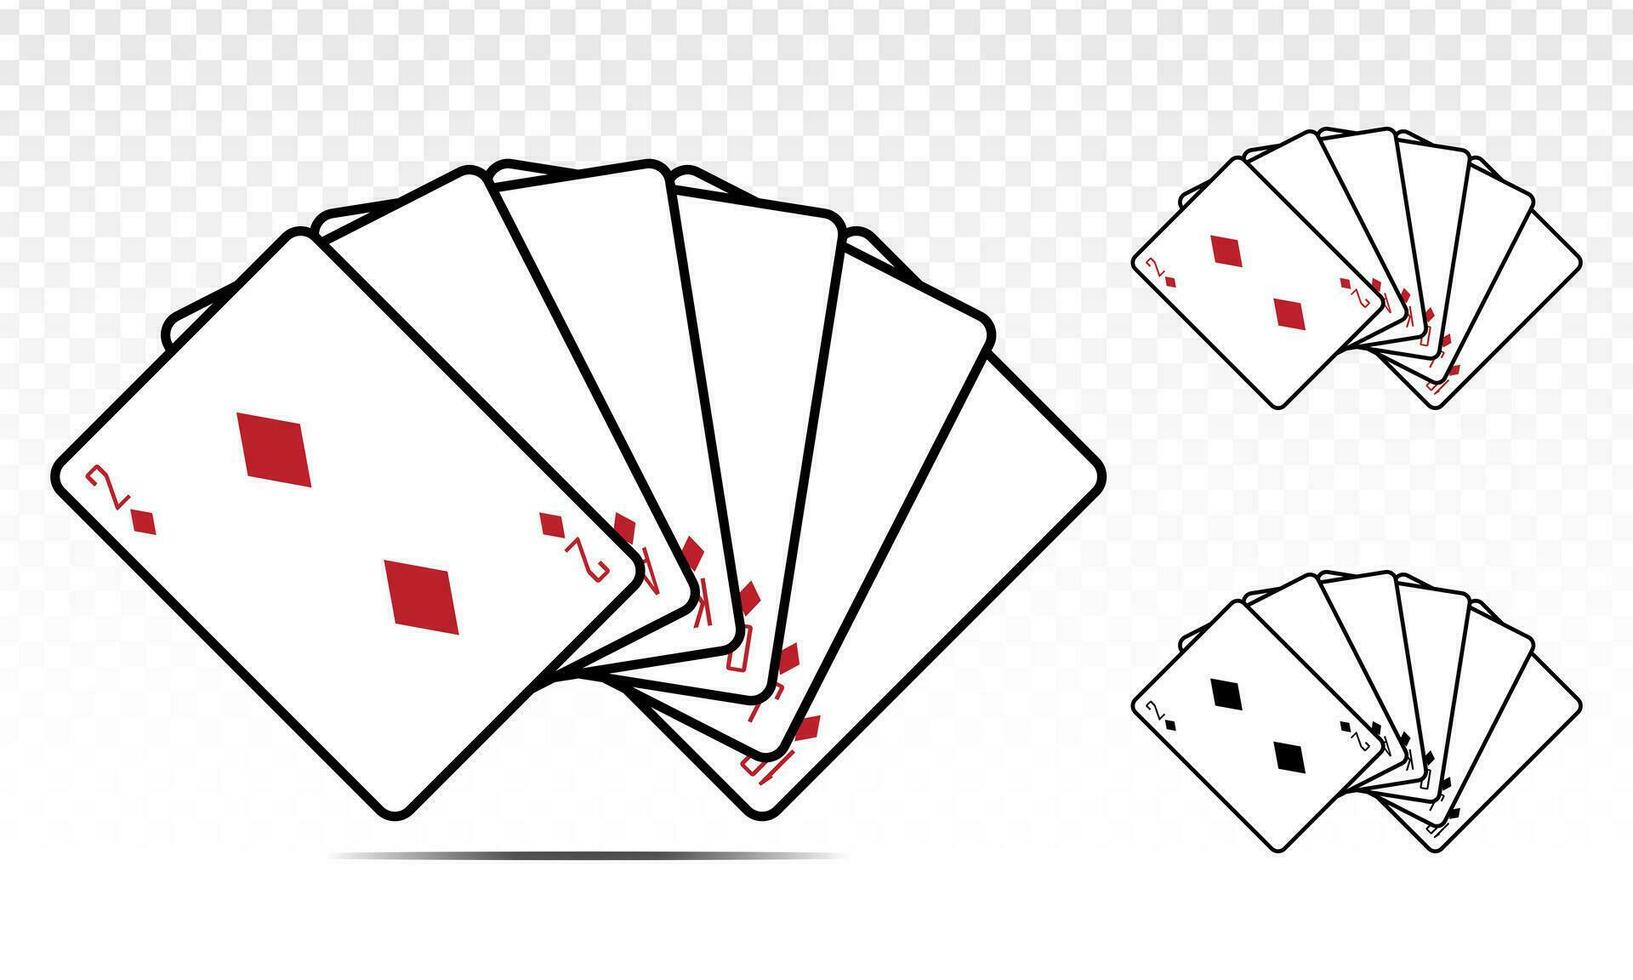 Straight flush diamond poker card. Flat vector icon for casino apps and websites